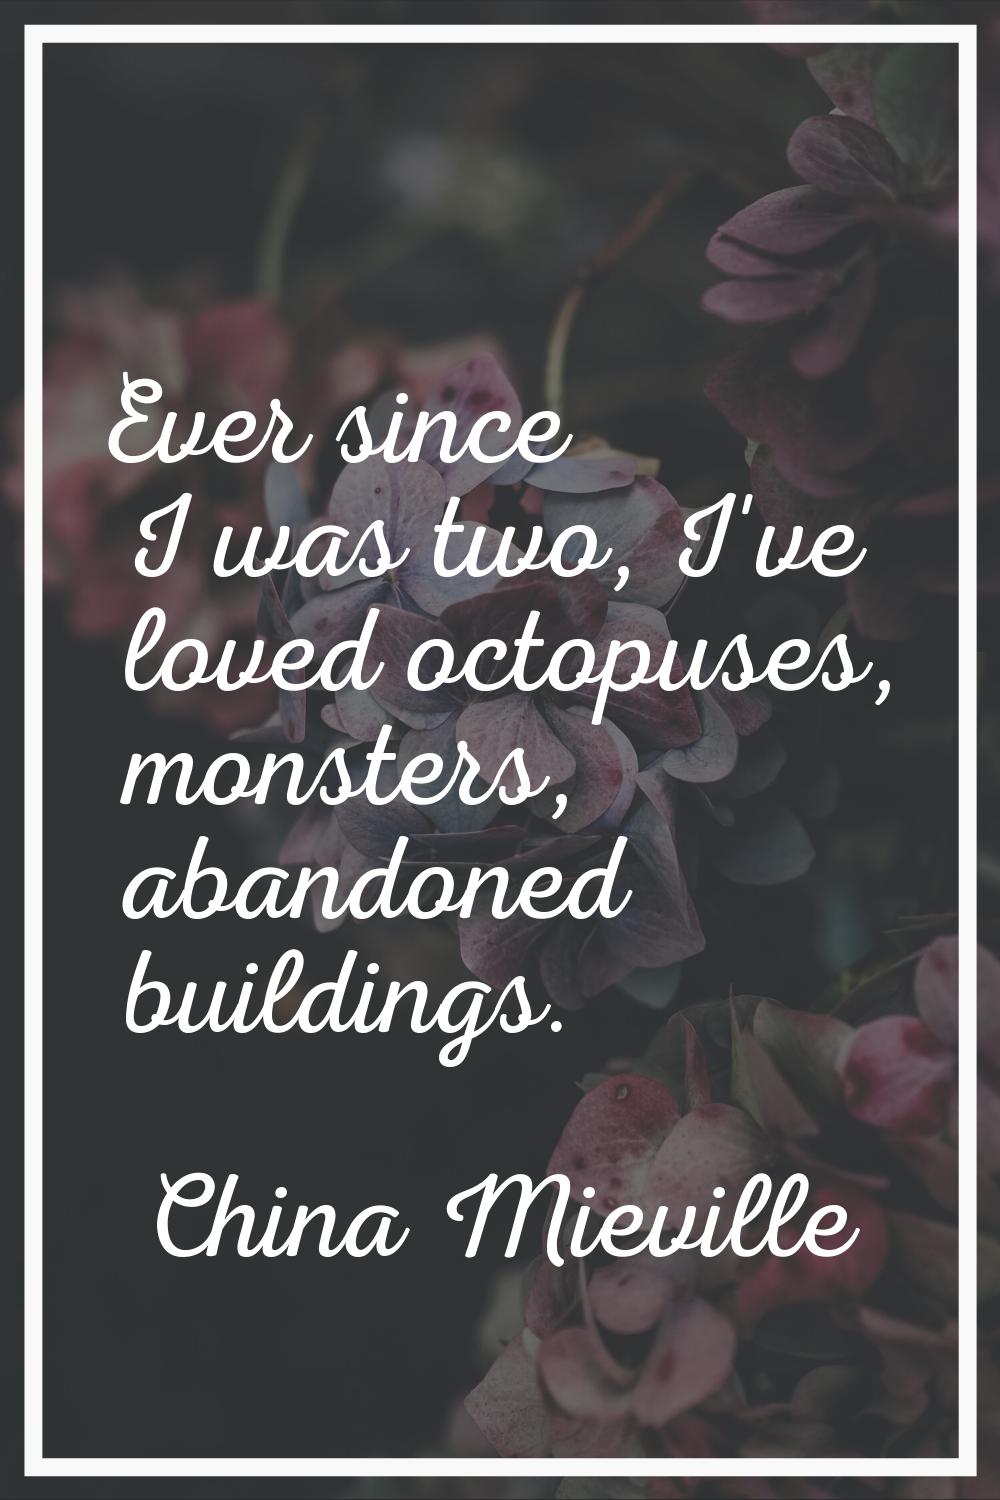 Ever since I was two, I've loved octopuses, monsters, abandoned buildings.